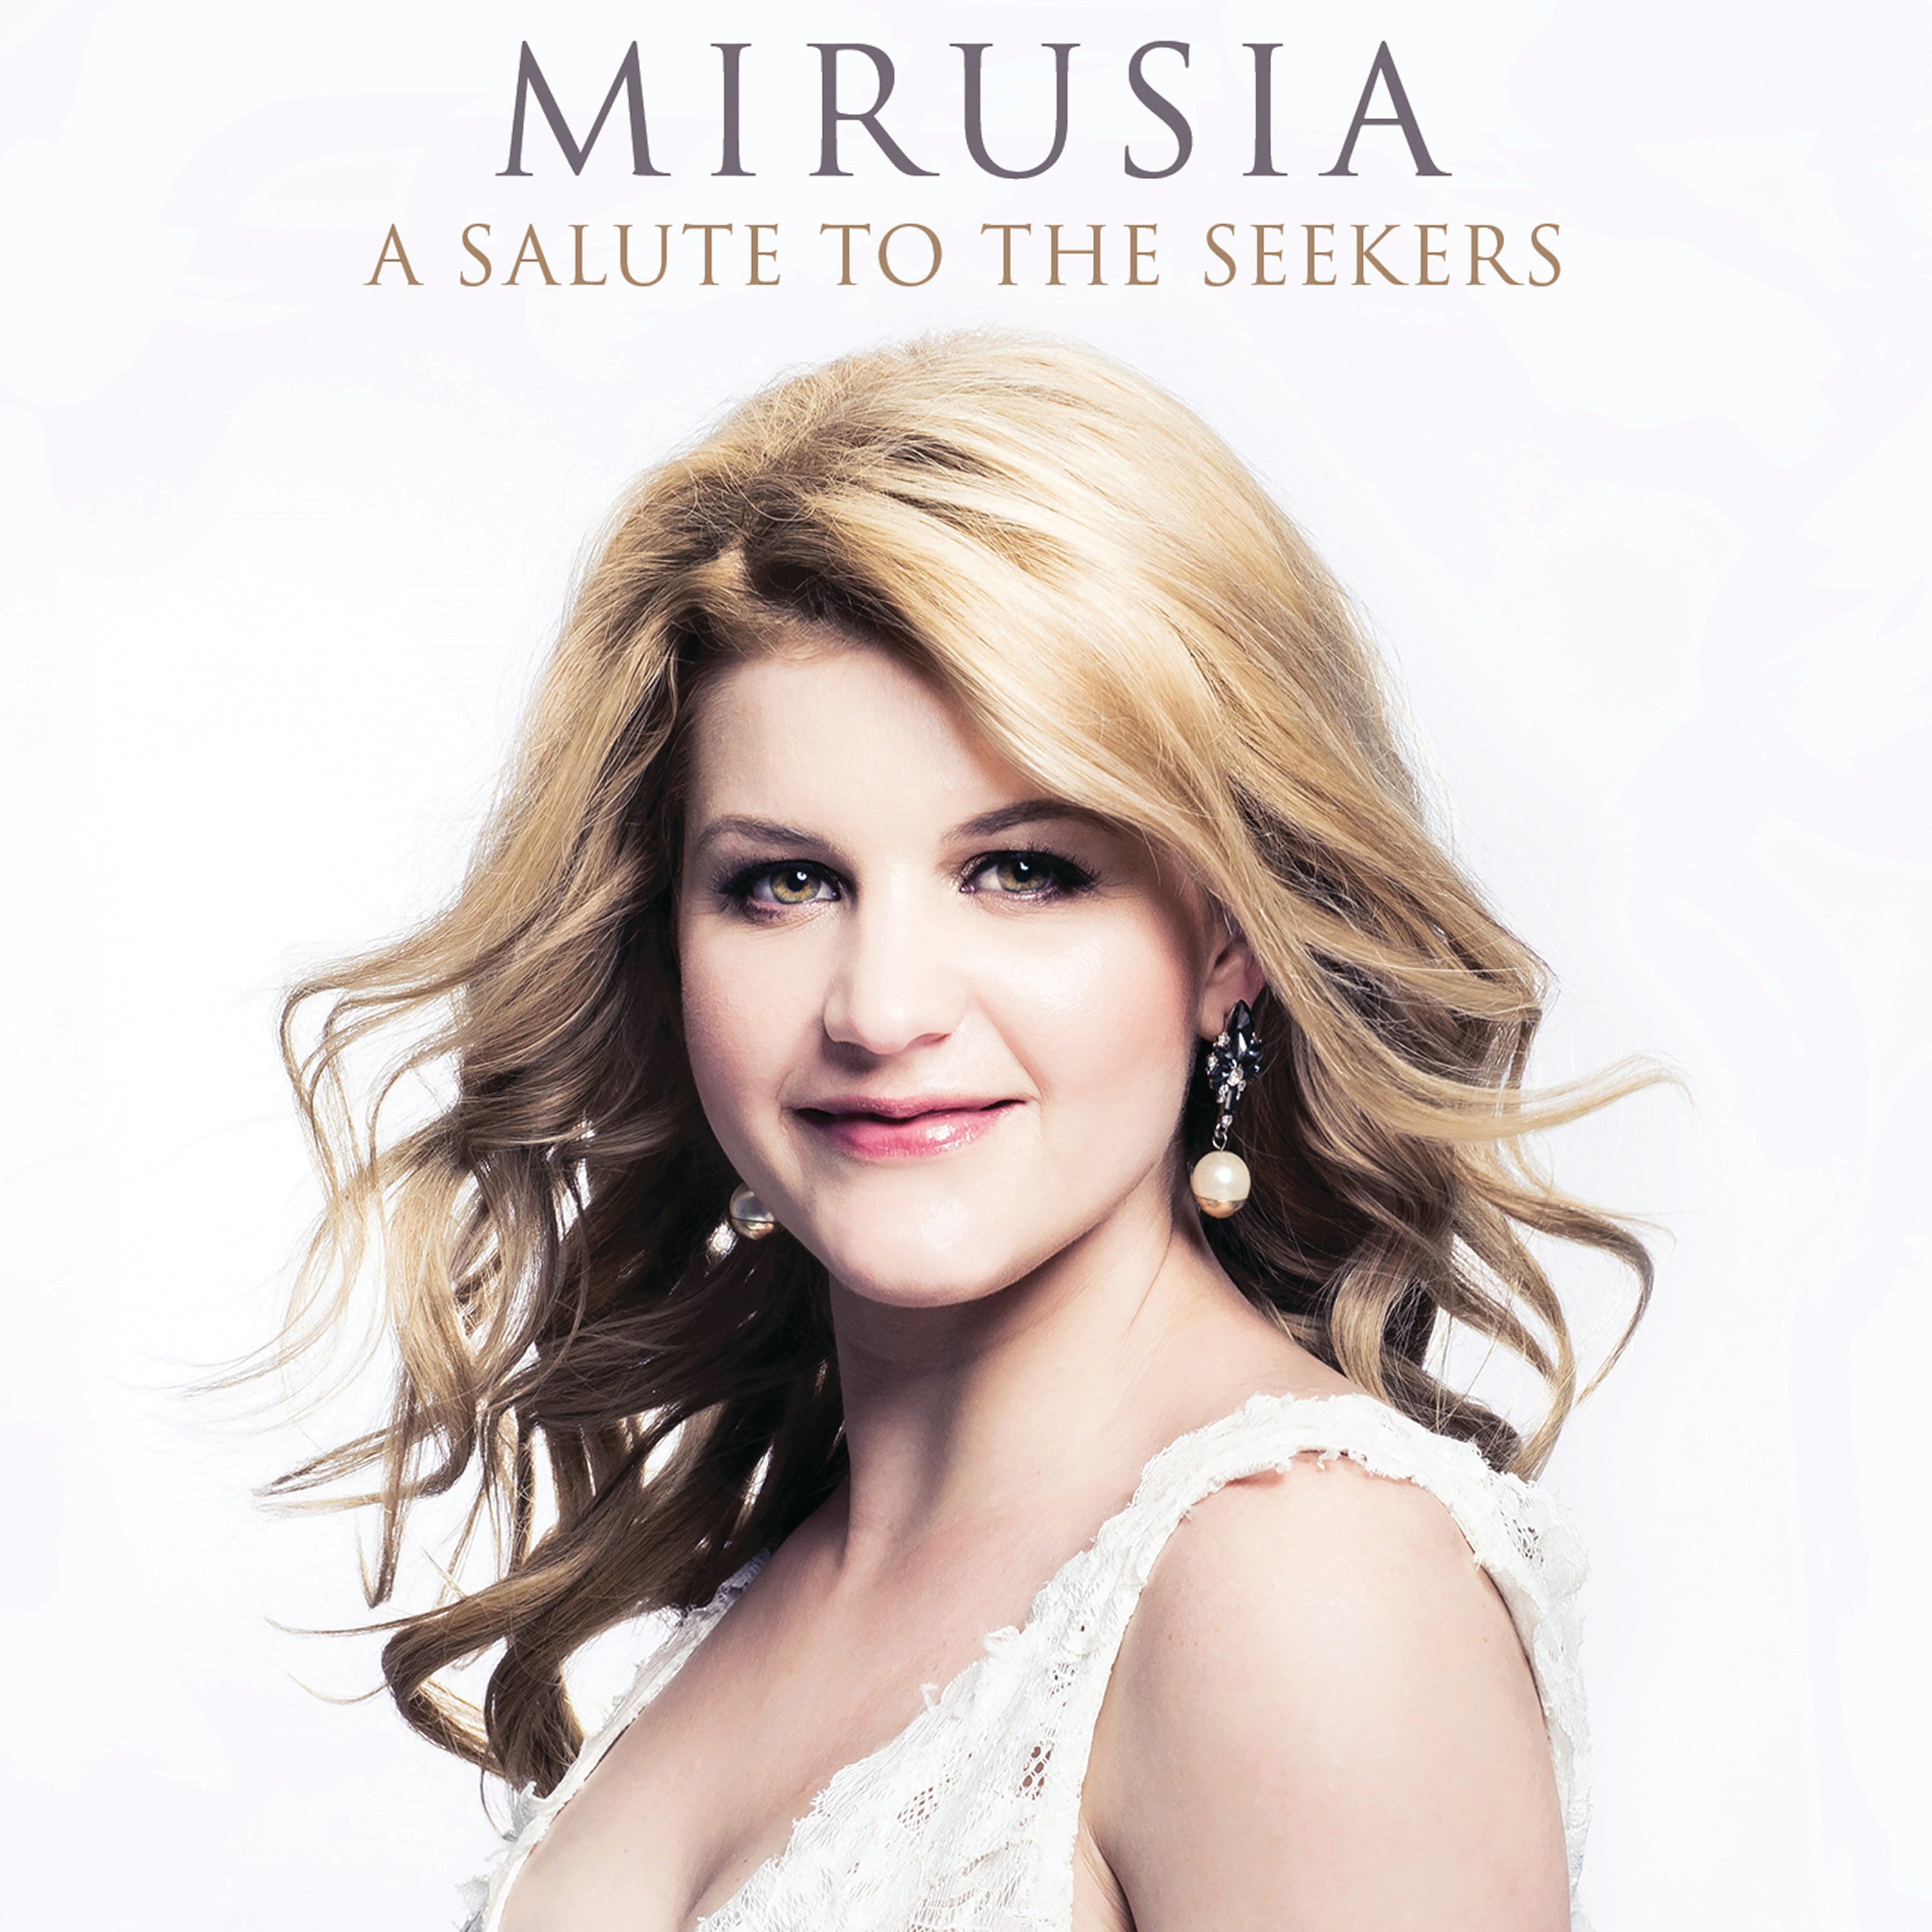 MIRUSIA - A SALUTE TO THE SEEKERS